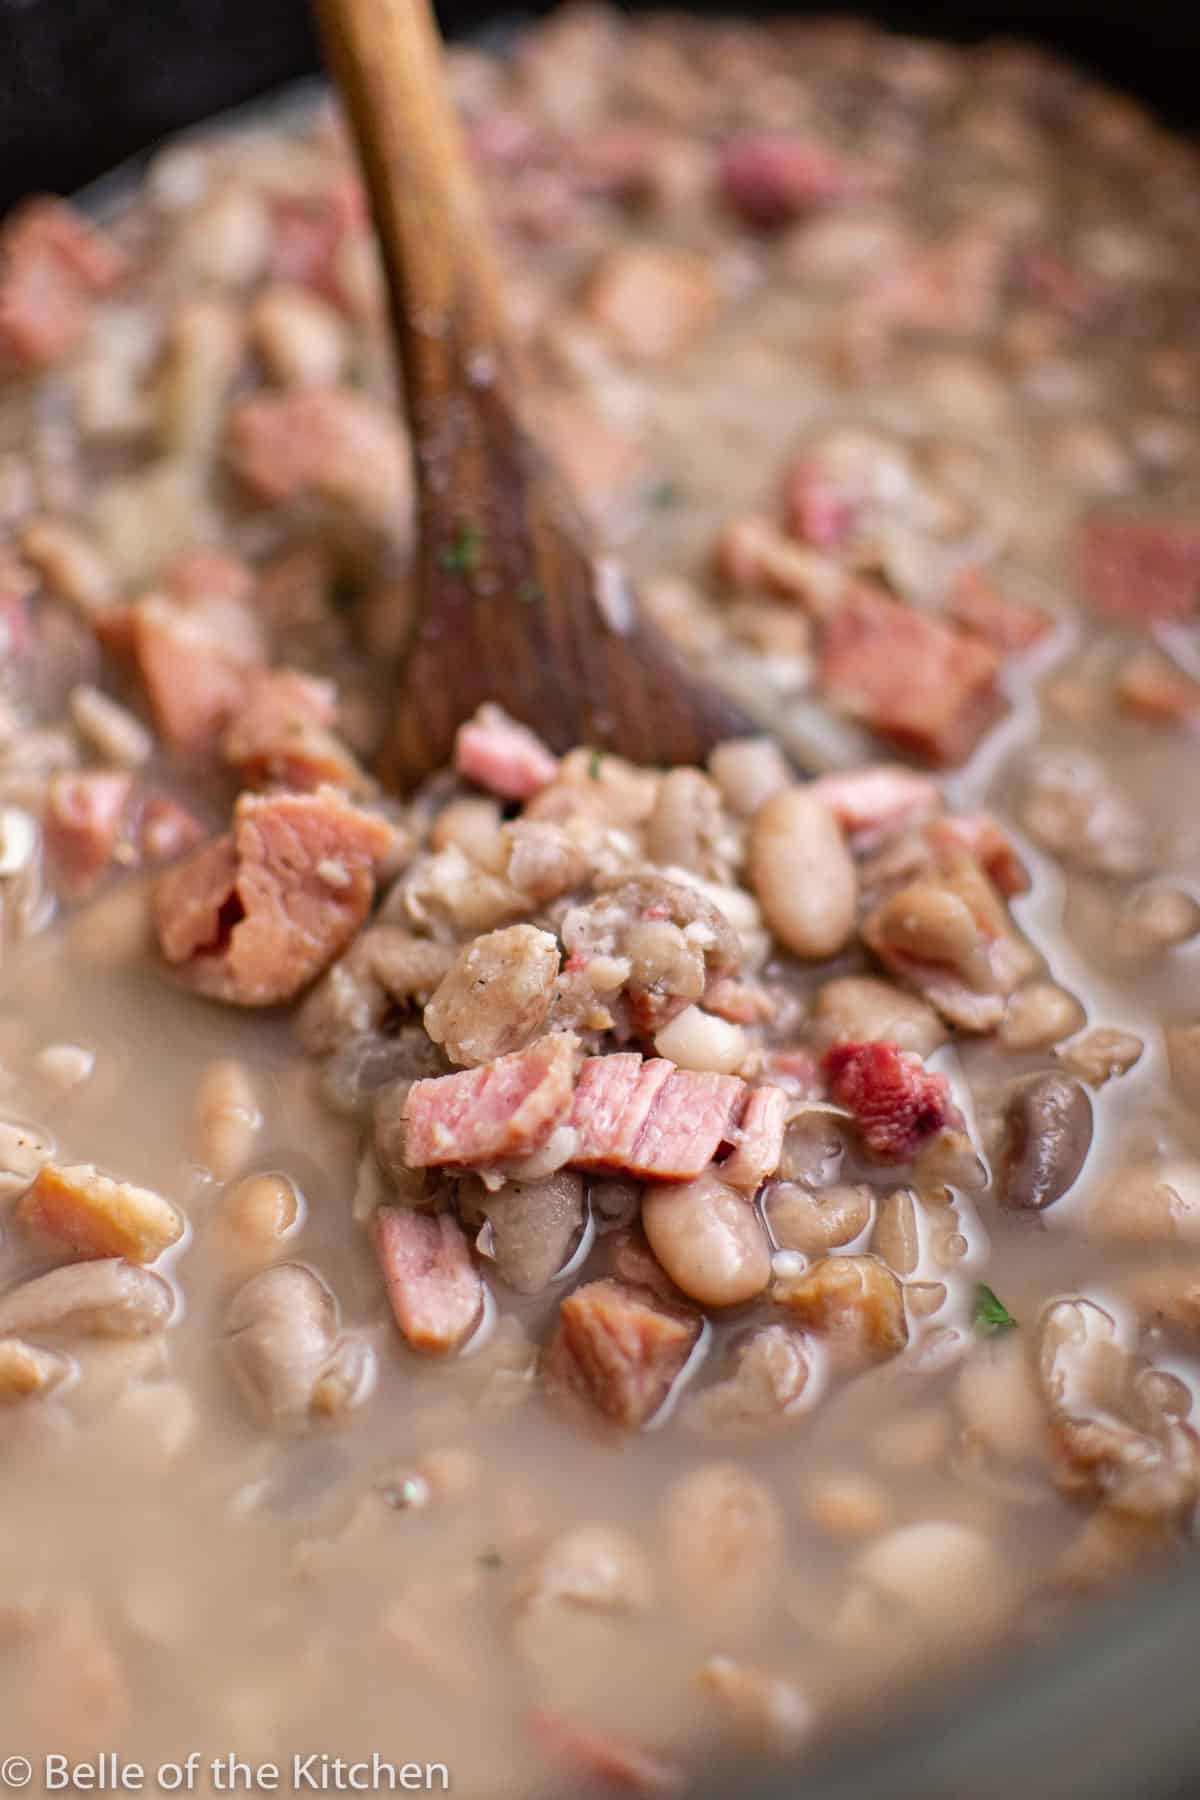 a crockpot bowl full of cooked ham and beans with a wooden spoon scooping some up.